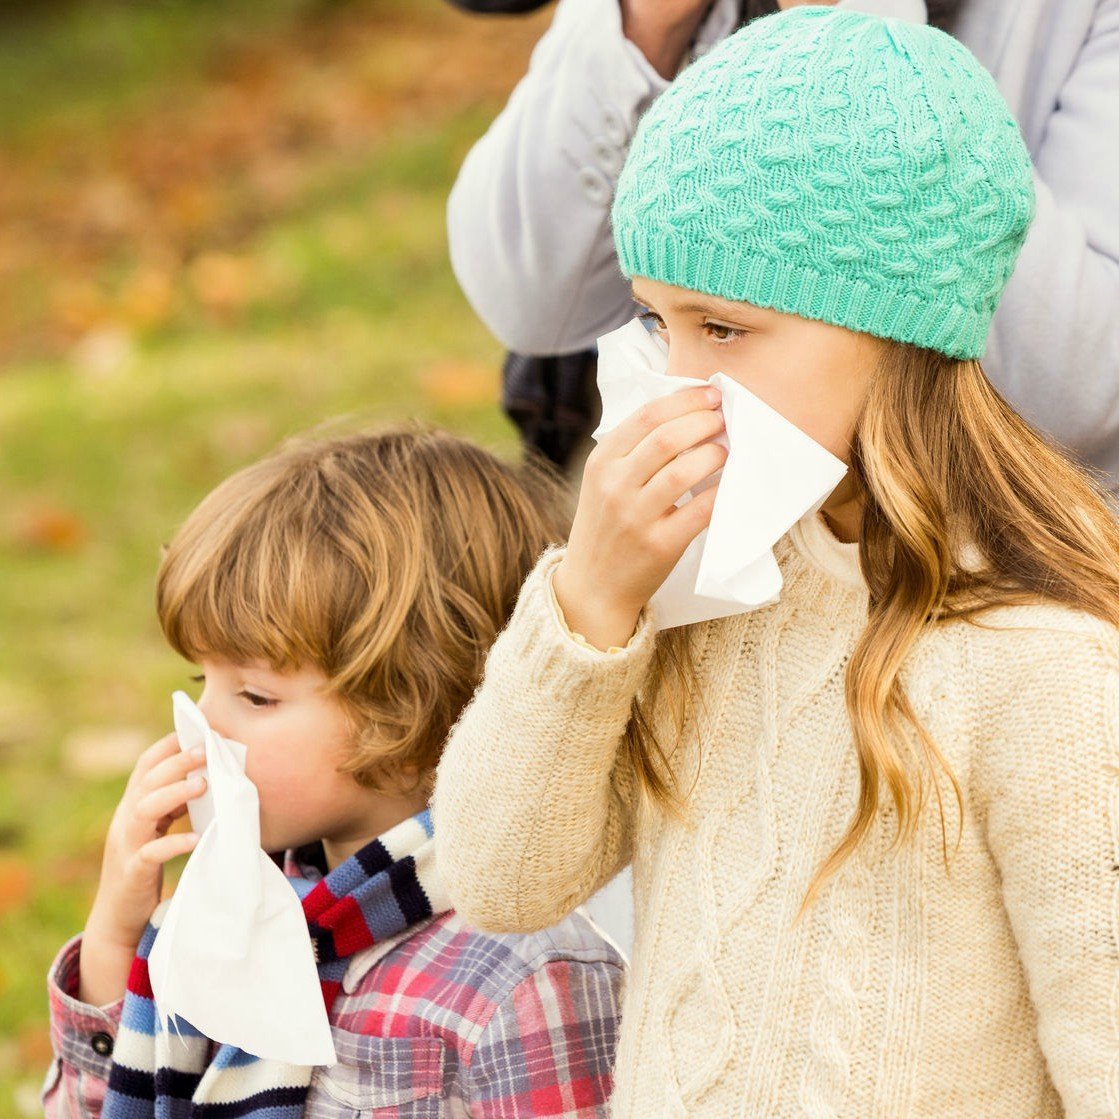 Keeping Siblings Healthy When One Child Is Sick